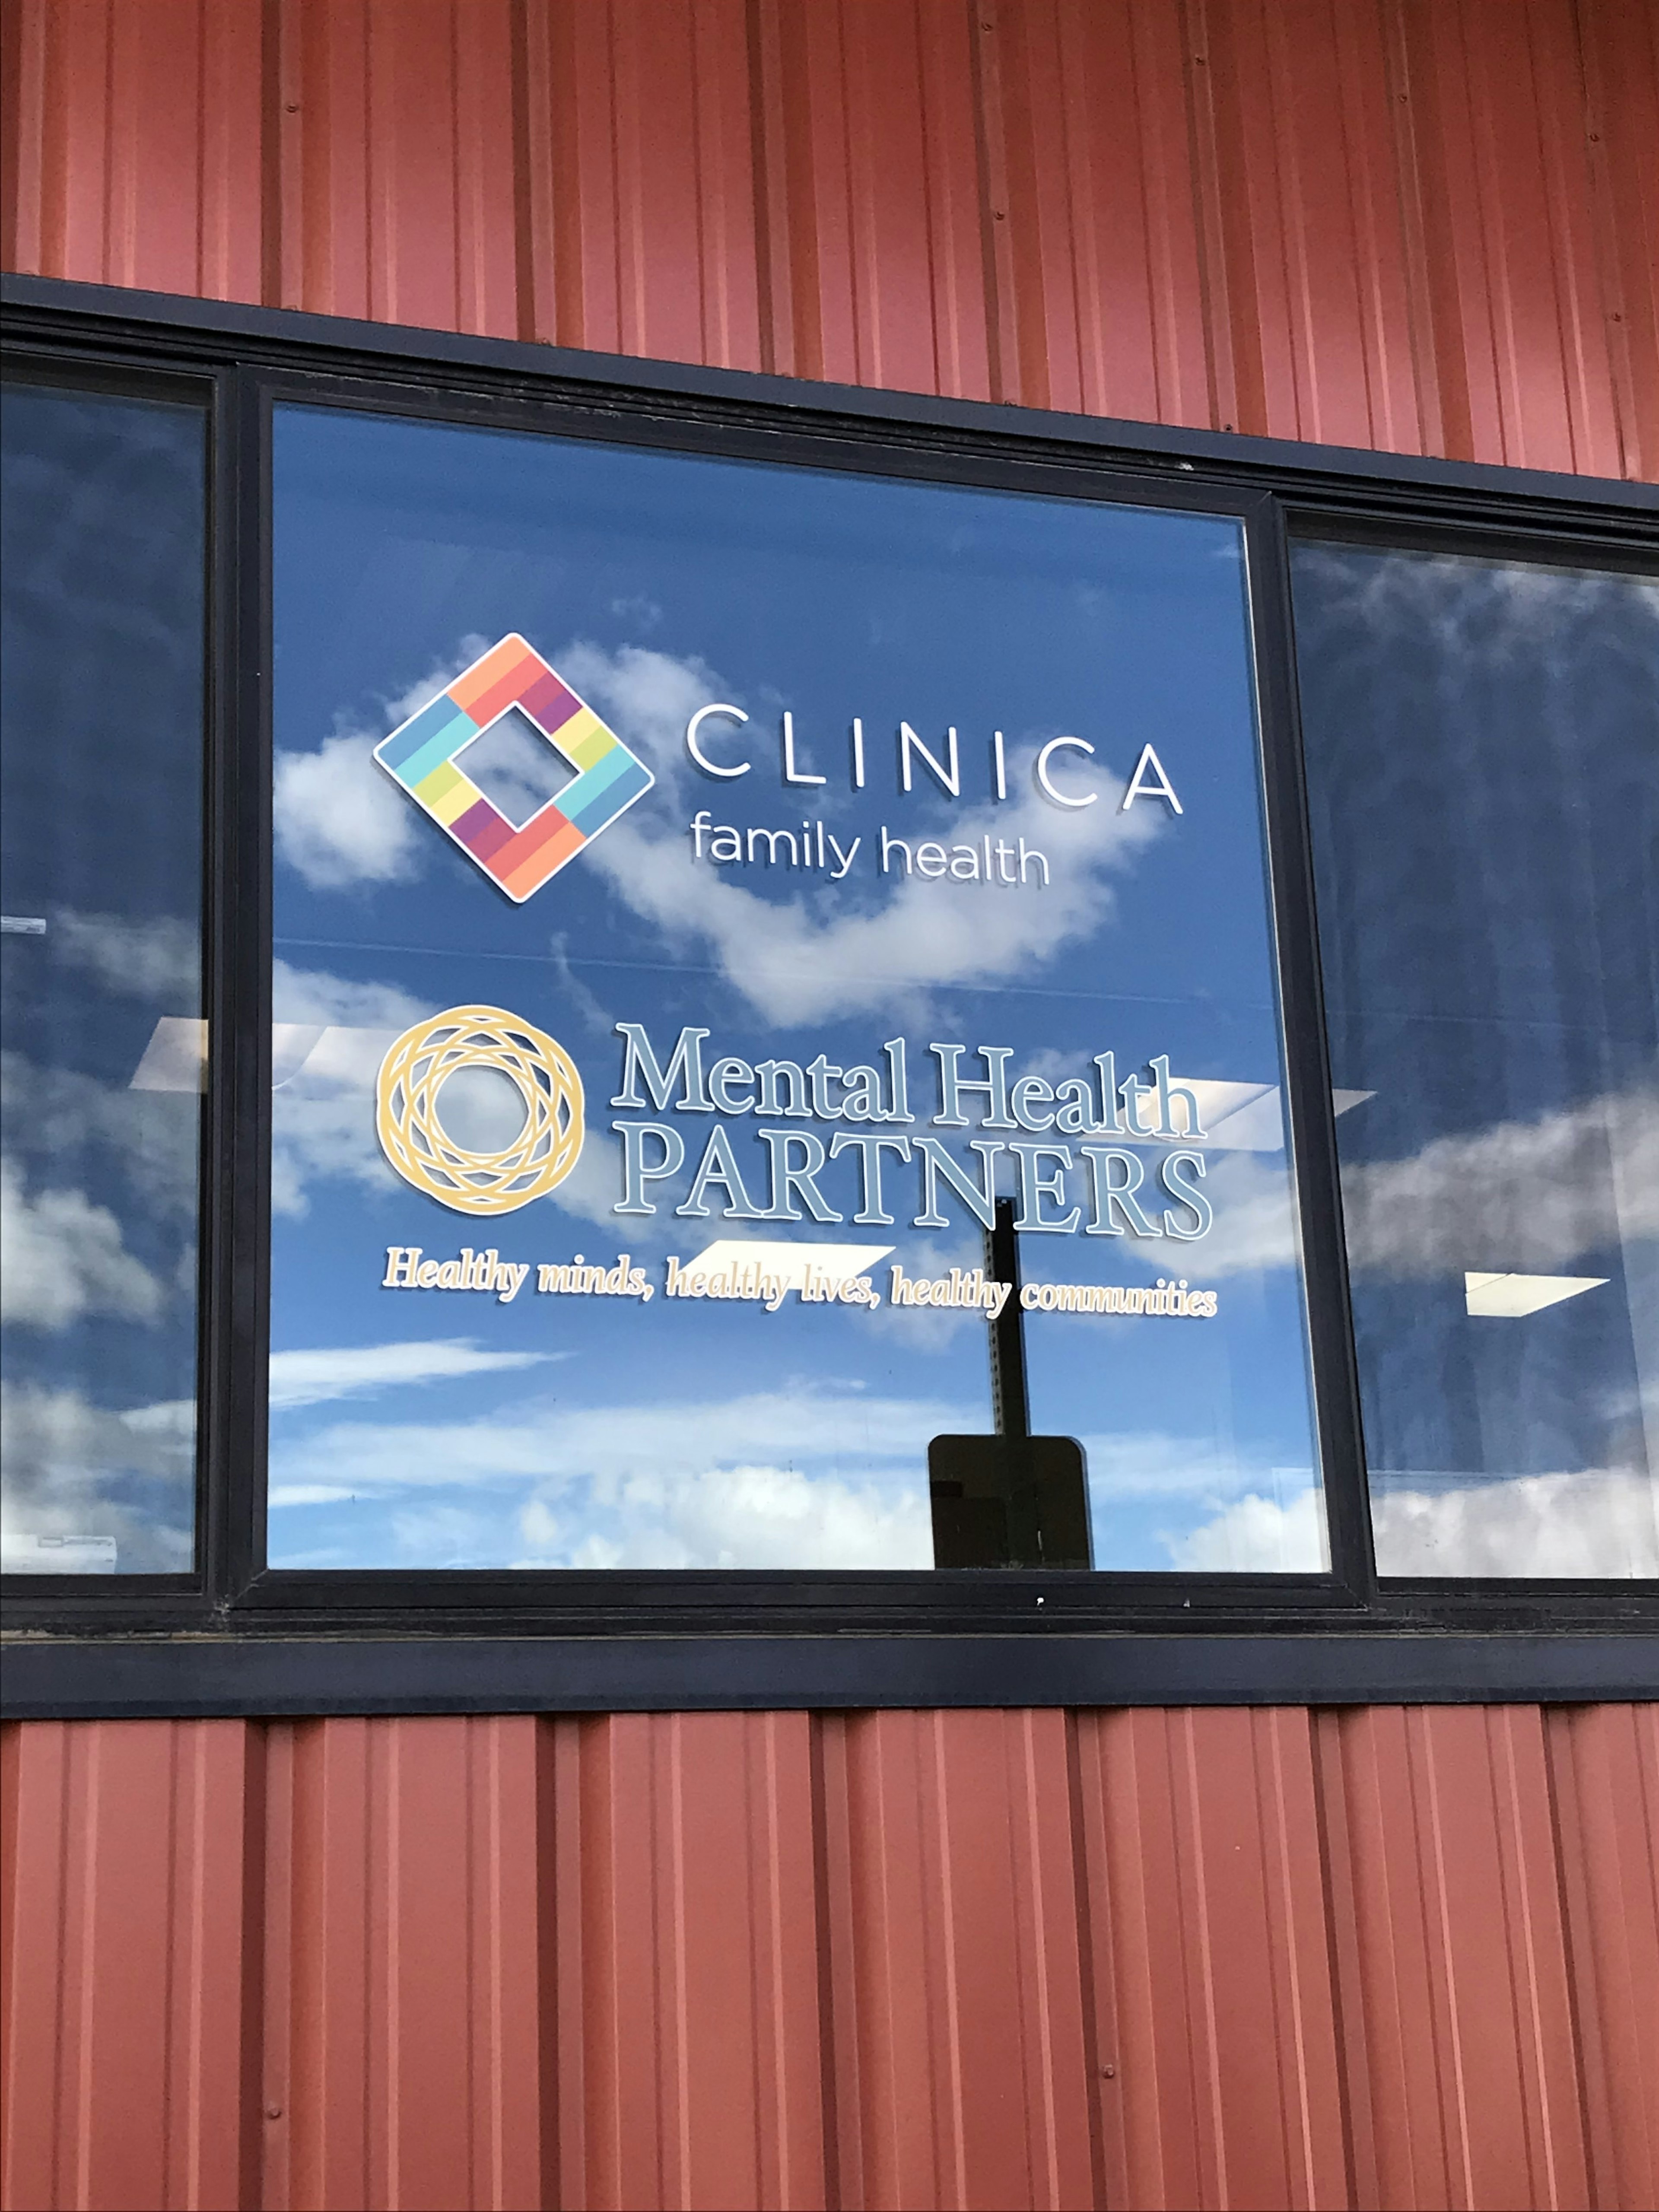 Window with Clinica and Mental Health Partners logos.